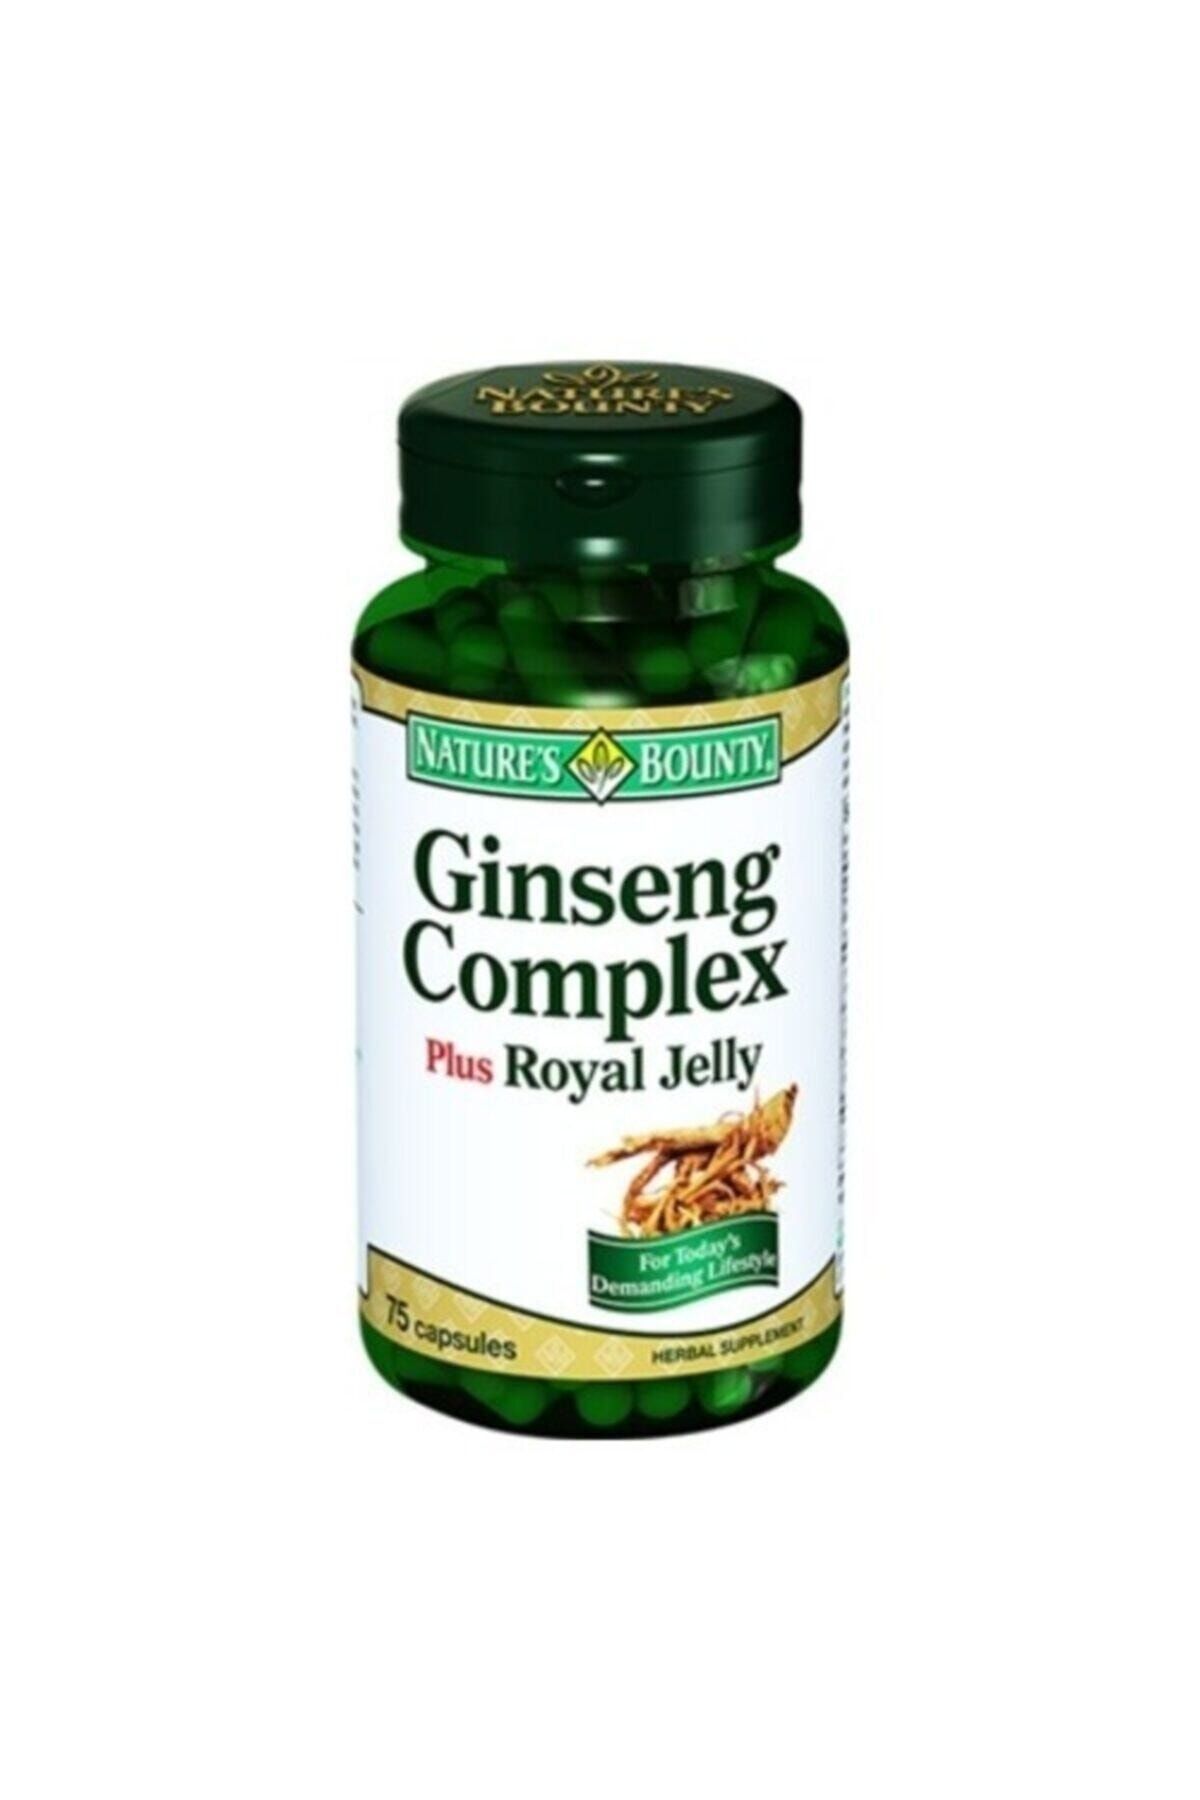 Natures Bounty Ginseng Complex